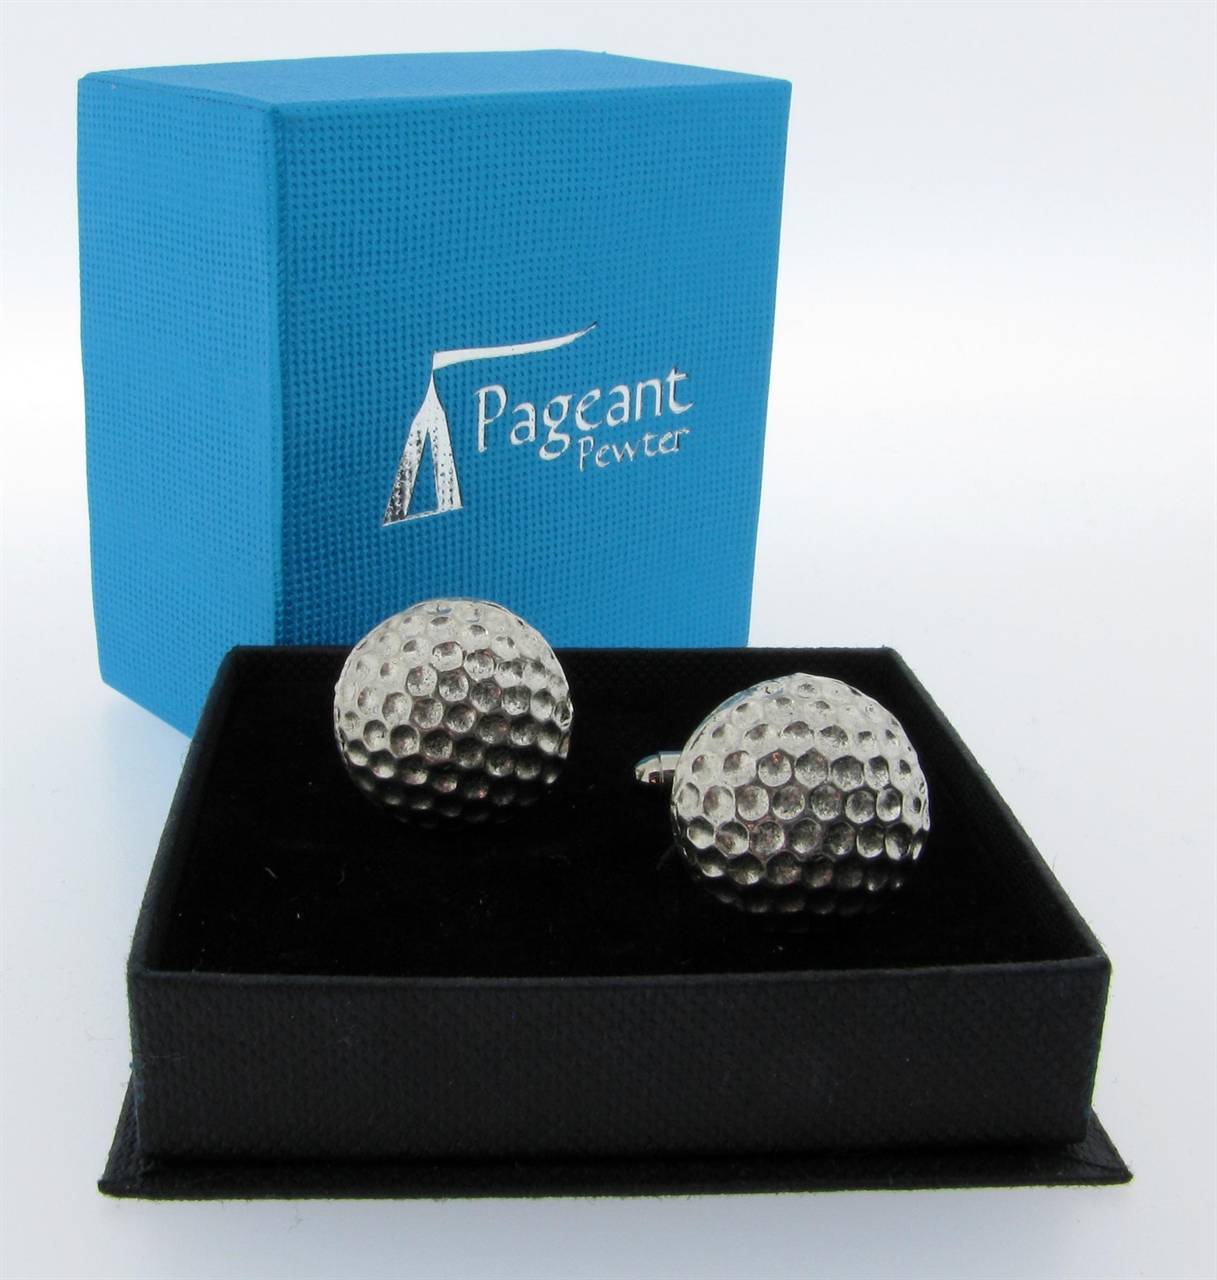 Golf Ball Cufflinks - high quality pewter gifts from Pageant Pewter